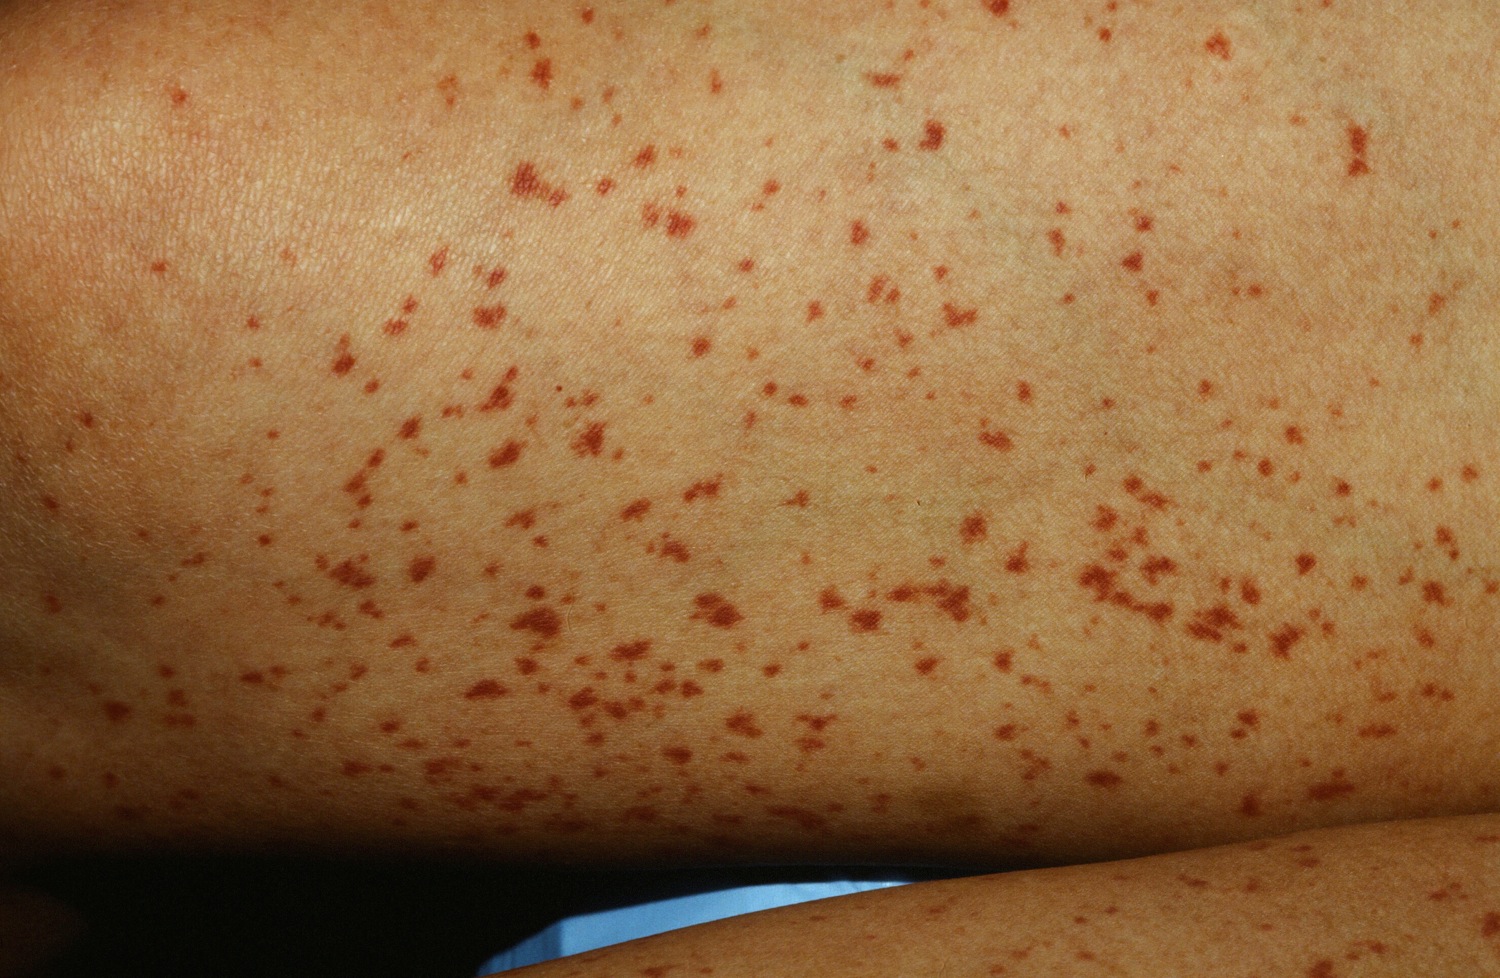 pinpoint red dots on skin that itch